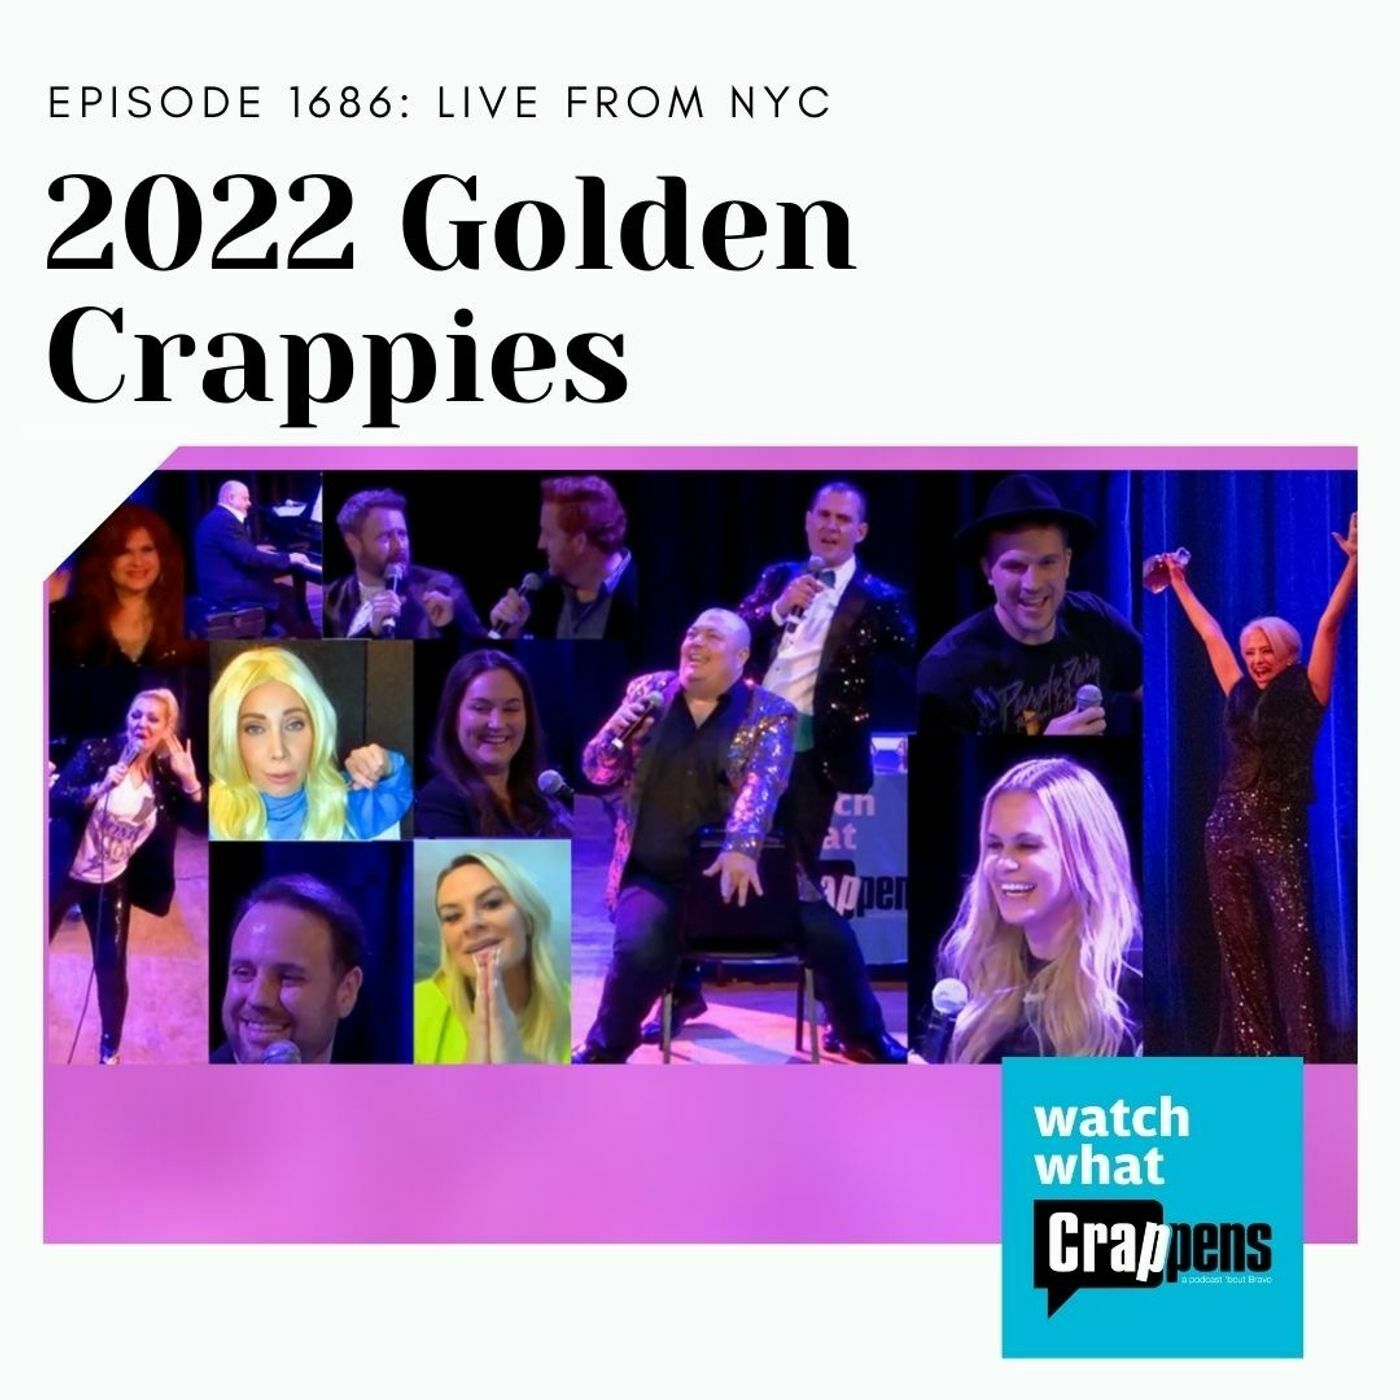 Watch What Crappens 2022 Golden Crappies Live From NYC